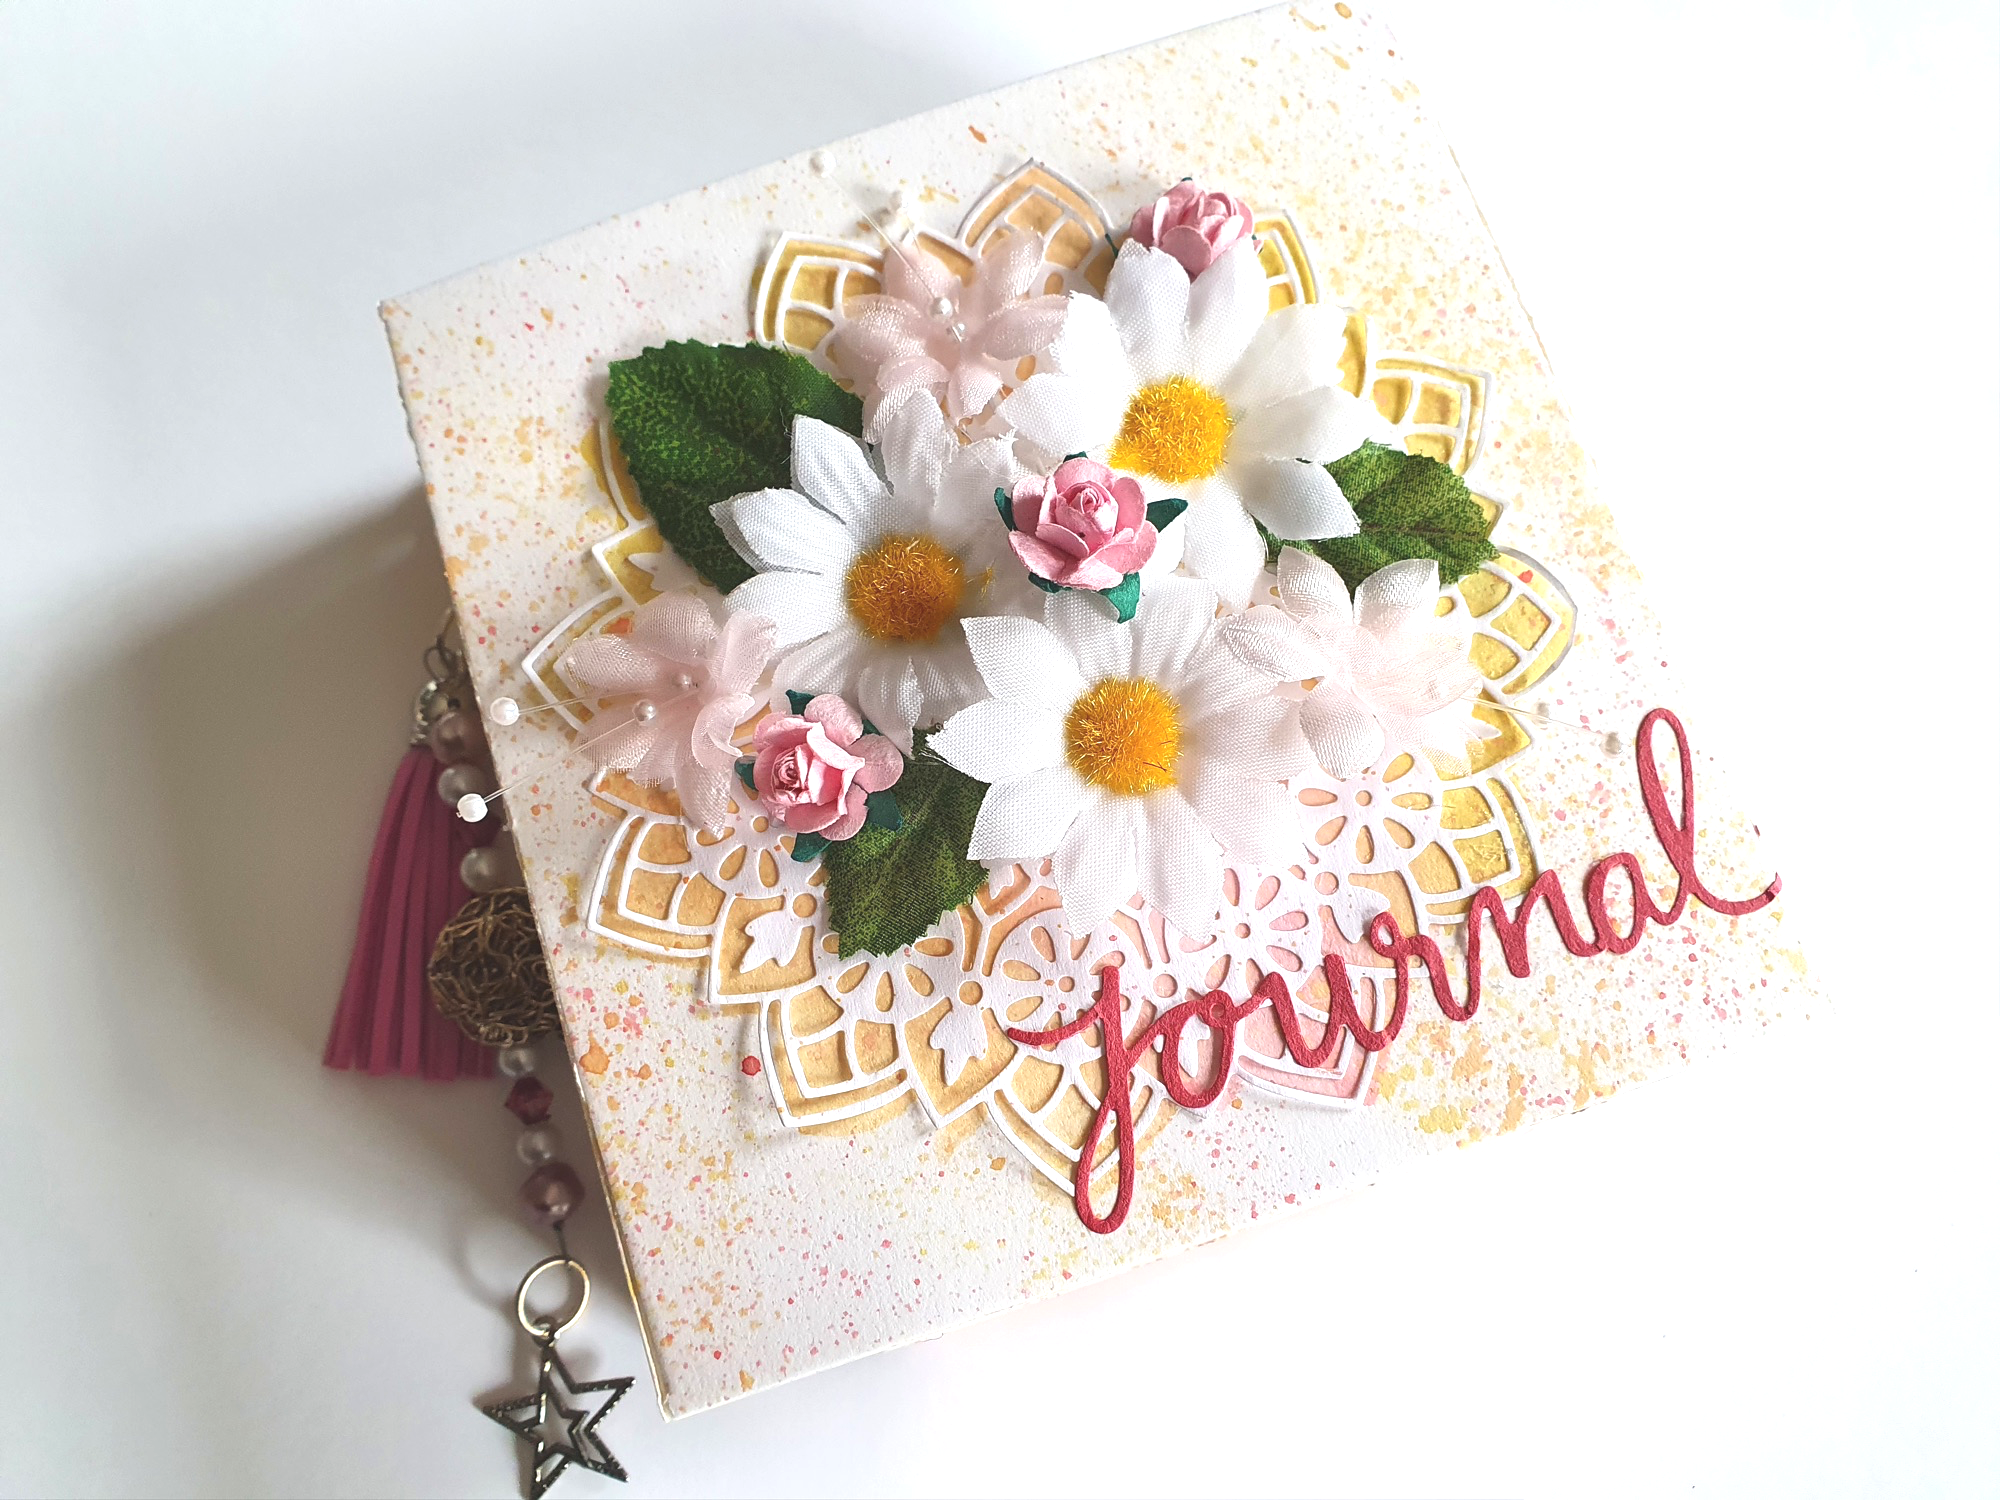 Handmade Journal with flowers. Great gift idea!